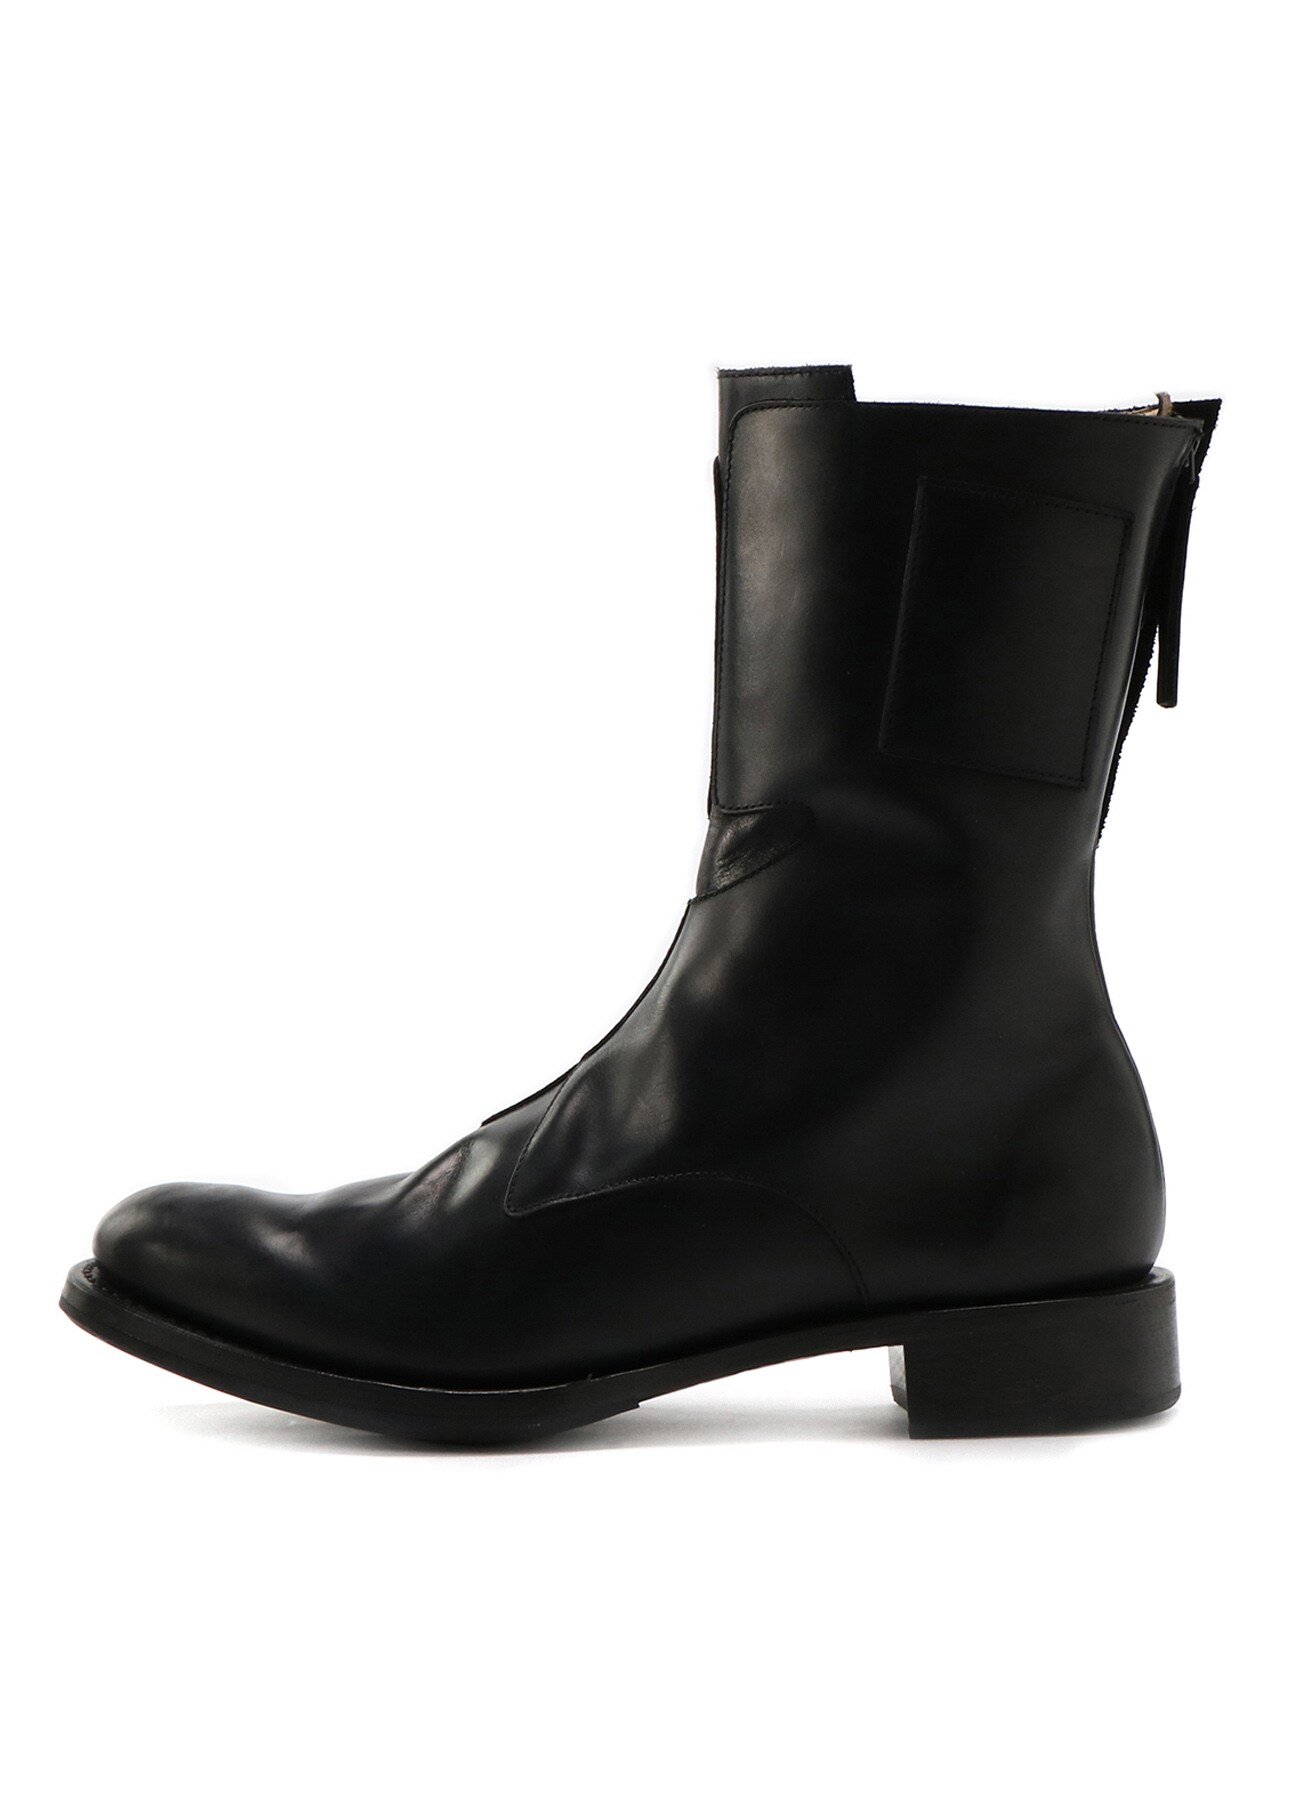 ITALIAN SMOOTH LEATHER MOOK-UP BOOTS